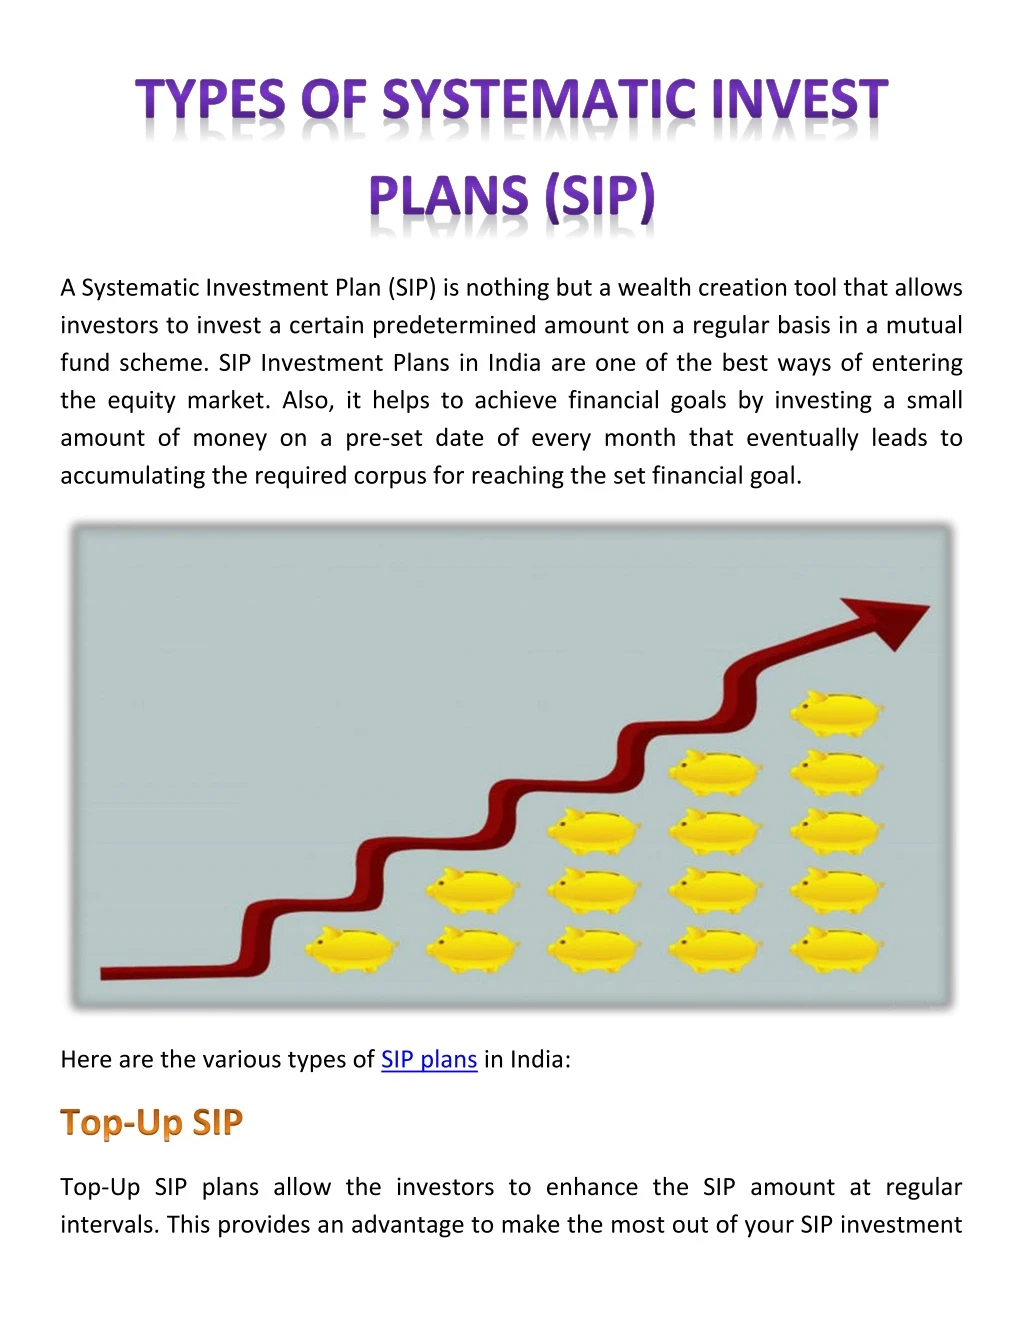 a systematic investment plan sip is nothing